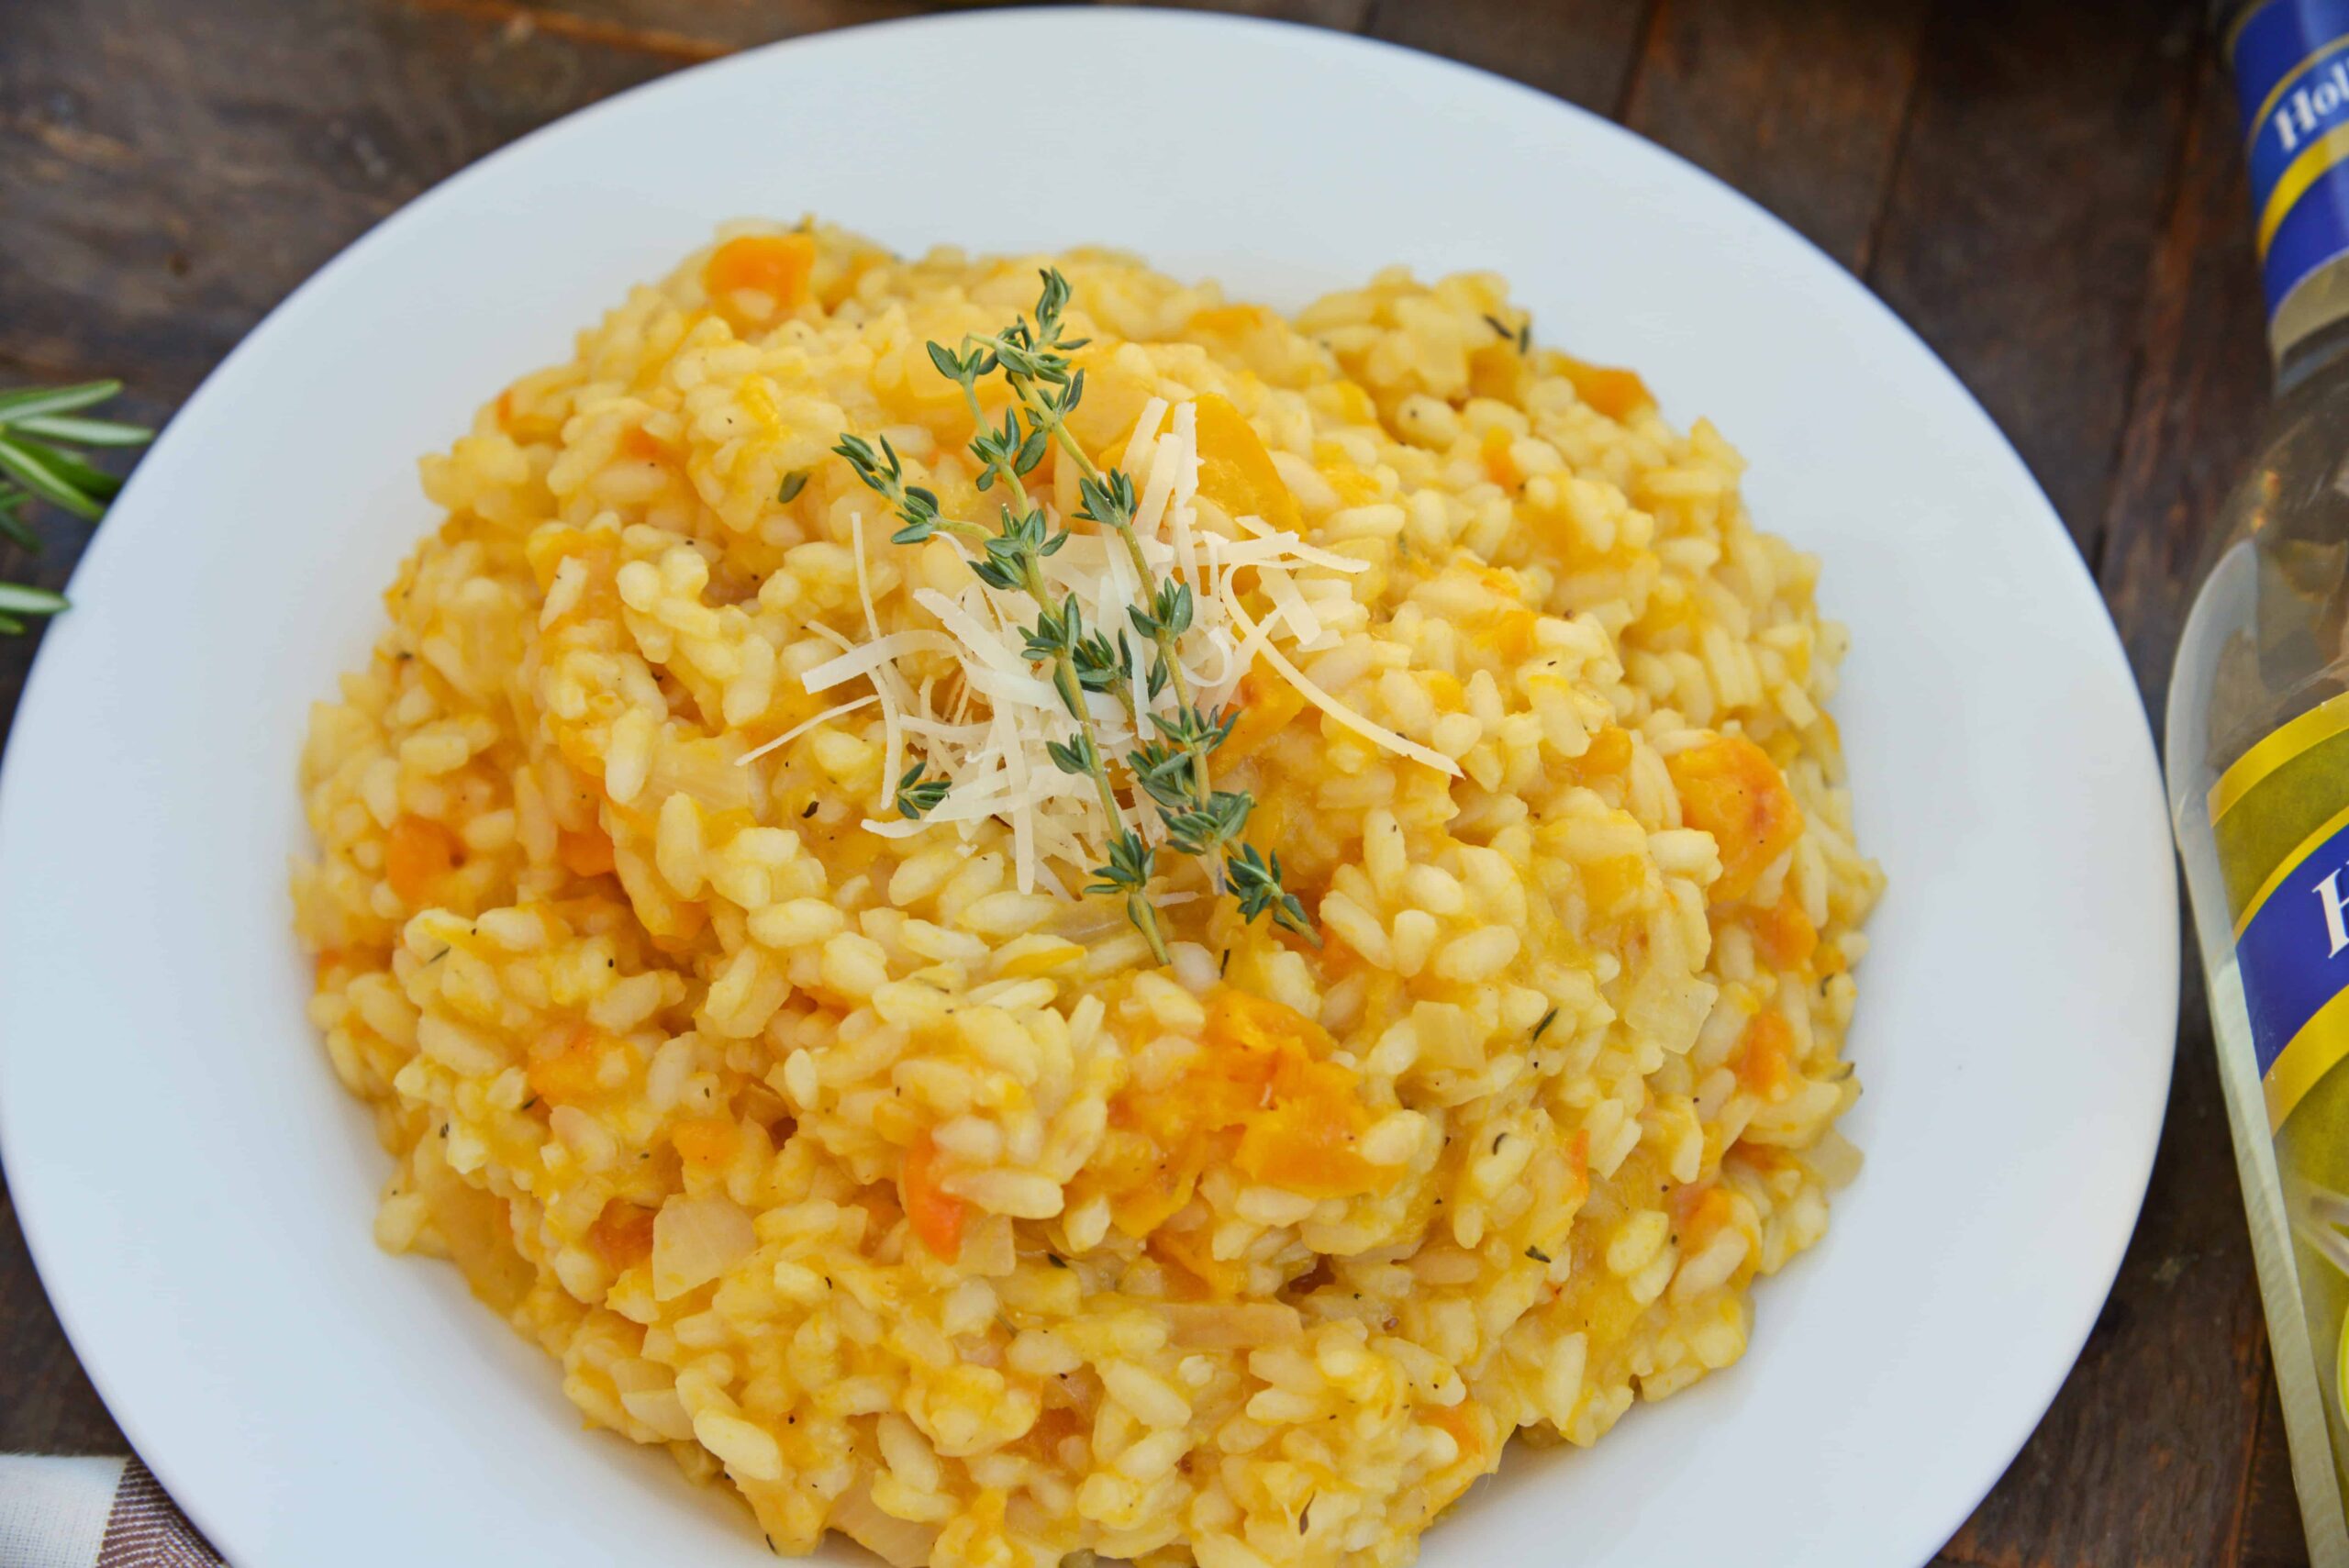 Butternut Squash Risotto is an easy side dish or entrée made with Arborio rice, crisp white cooking wine, sweet roasted butternut squash and fresh thyme. #risottorecipes #butternutsquash www.savoryexperiments.com